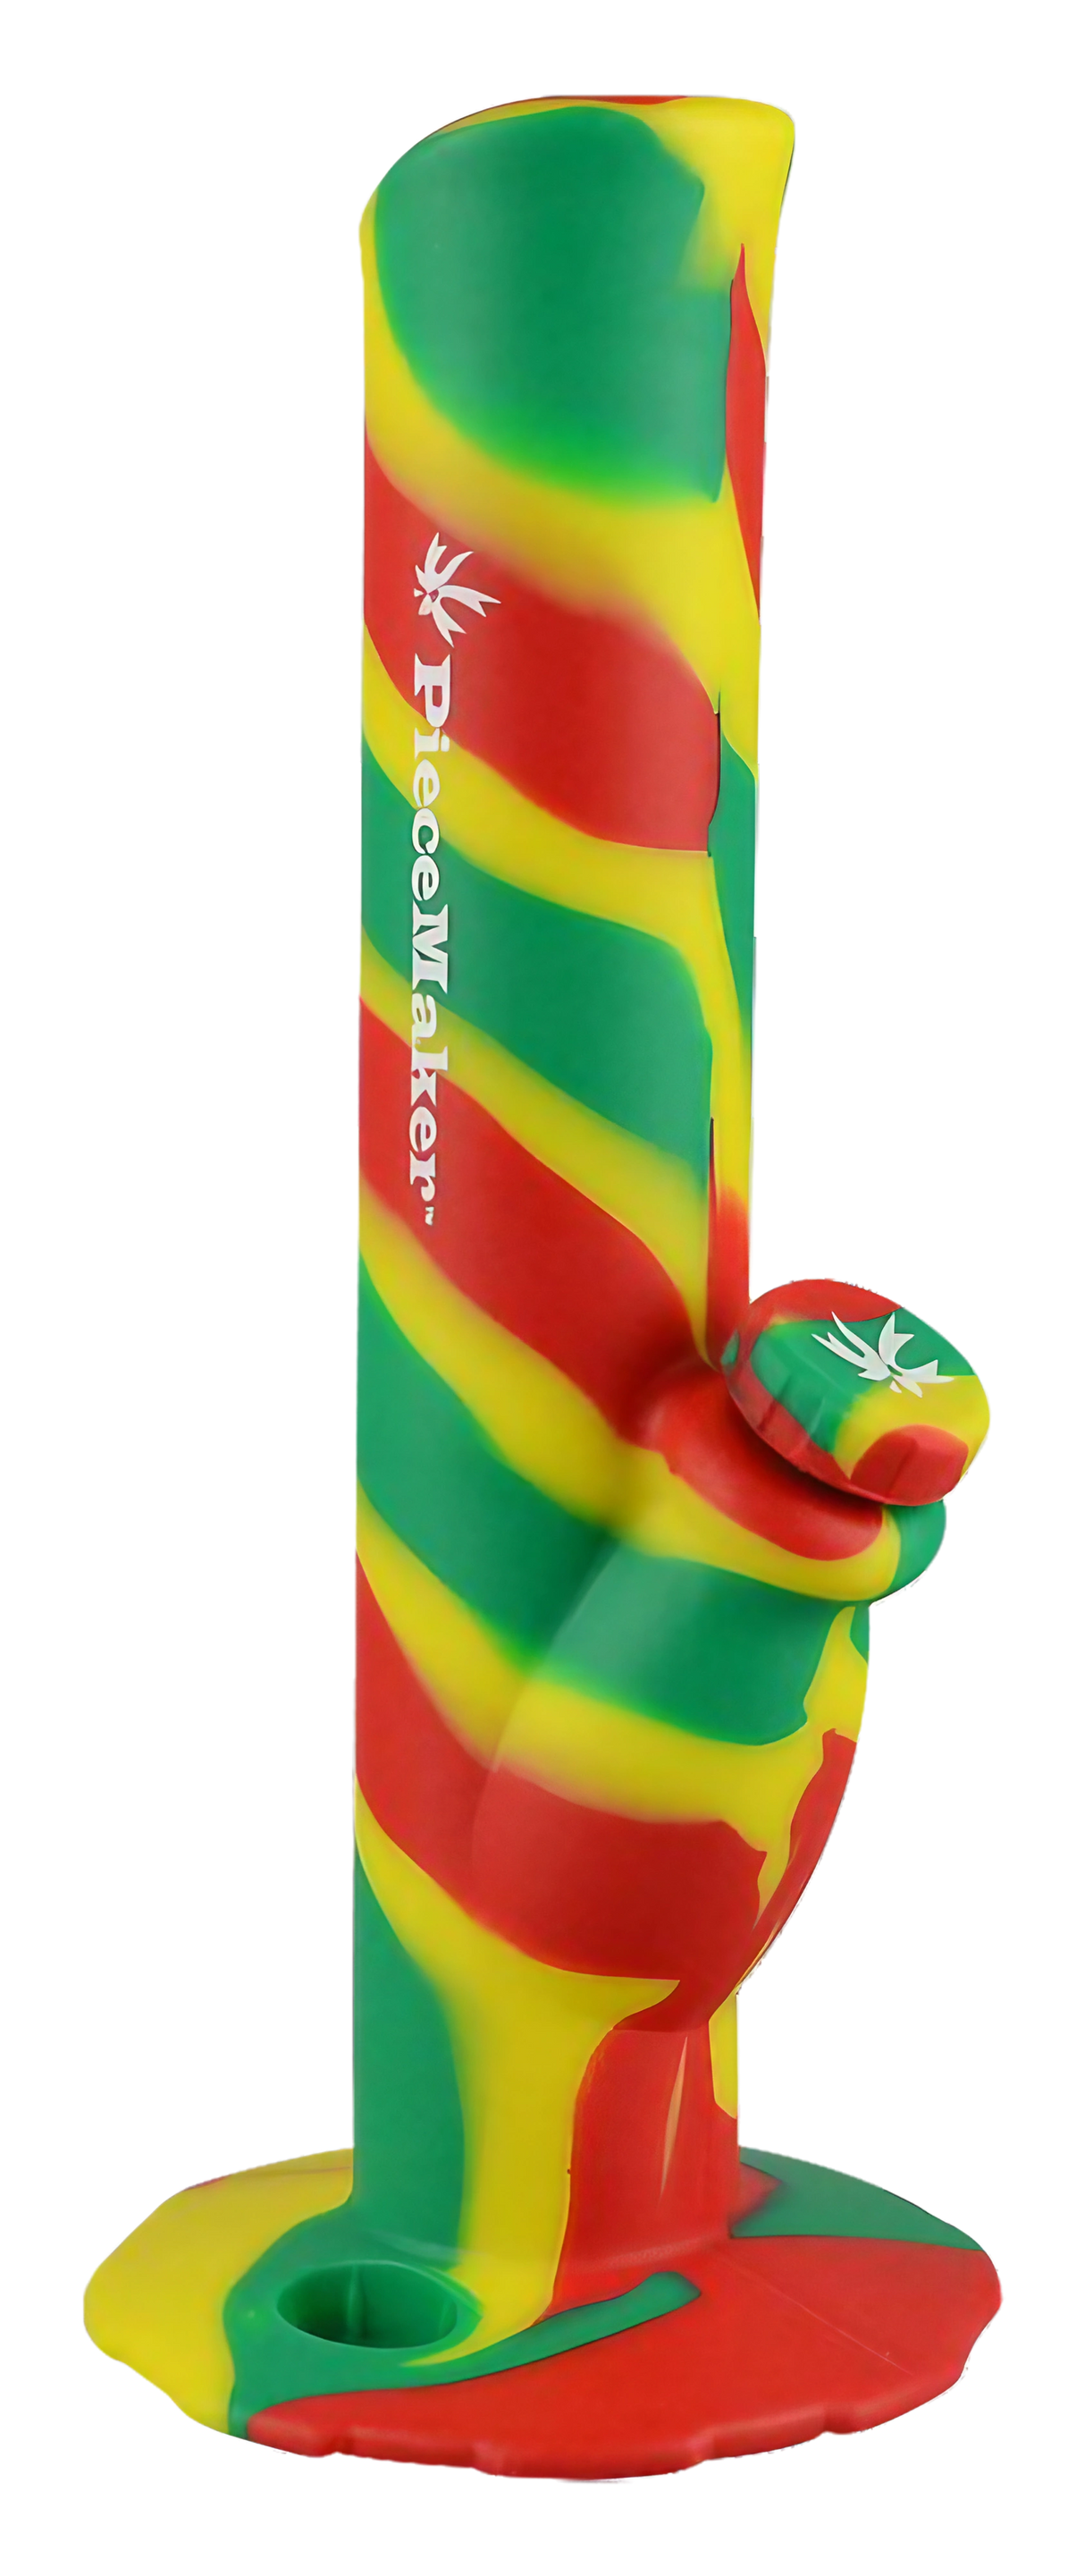 PieceMaker Kermit Silicone Water Pipe in Rasta colors, front view, with glow-in-the-dark feature